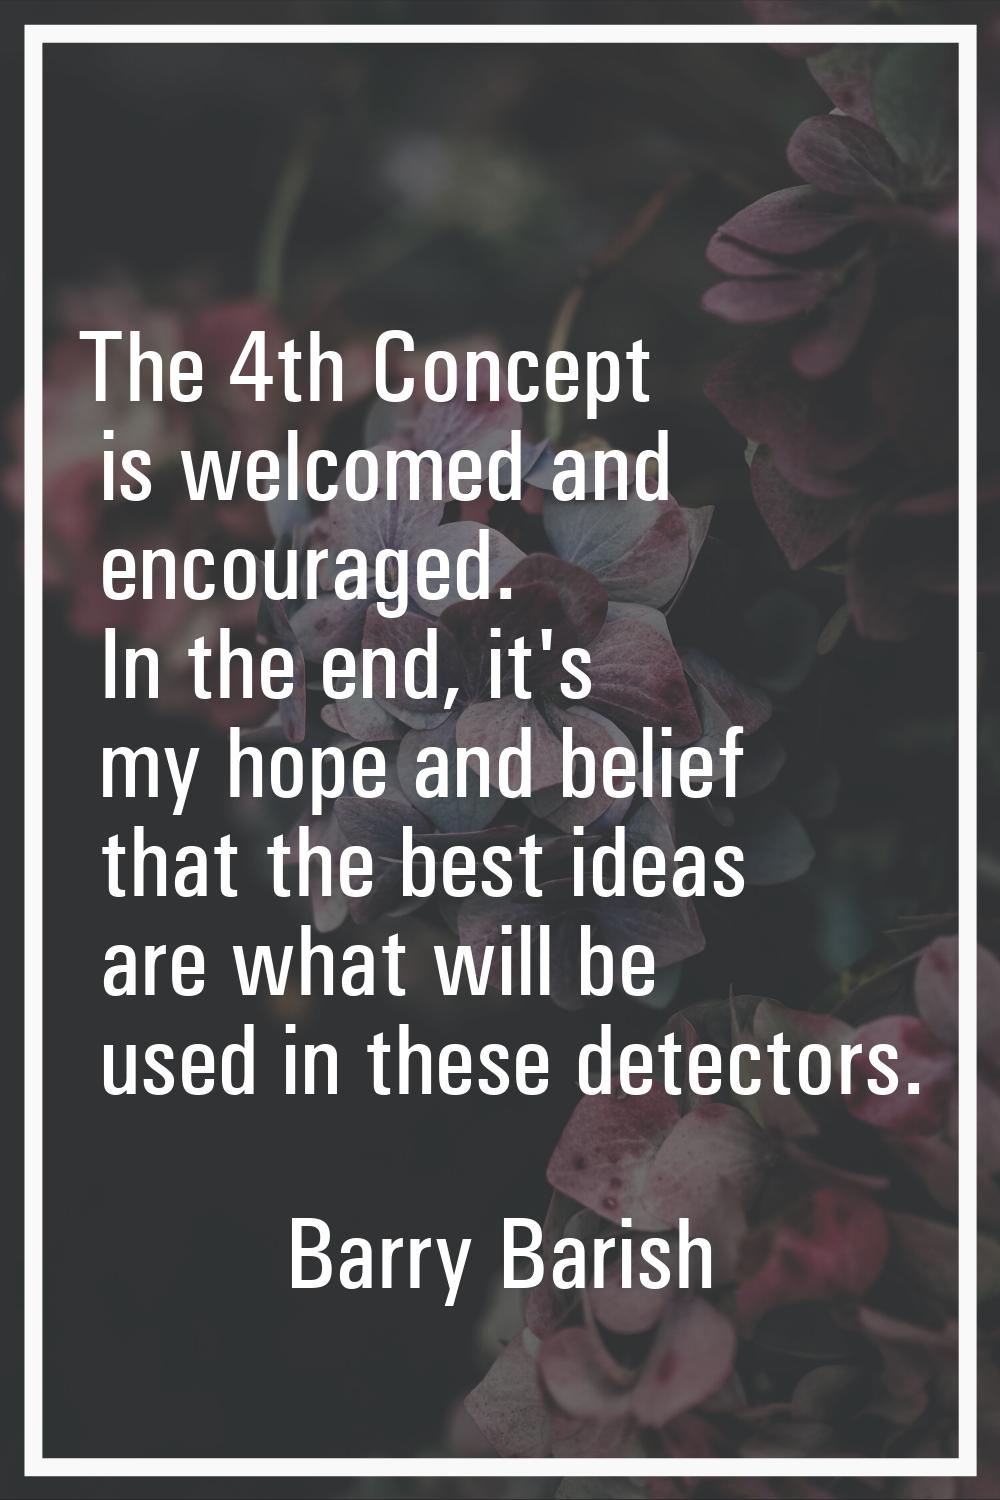 The 4th Concept is welcomed and encouraged. In the end, it's my hope and belief that the best ideas